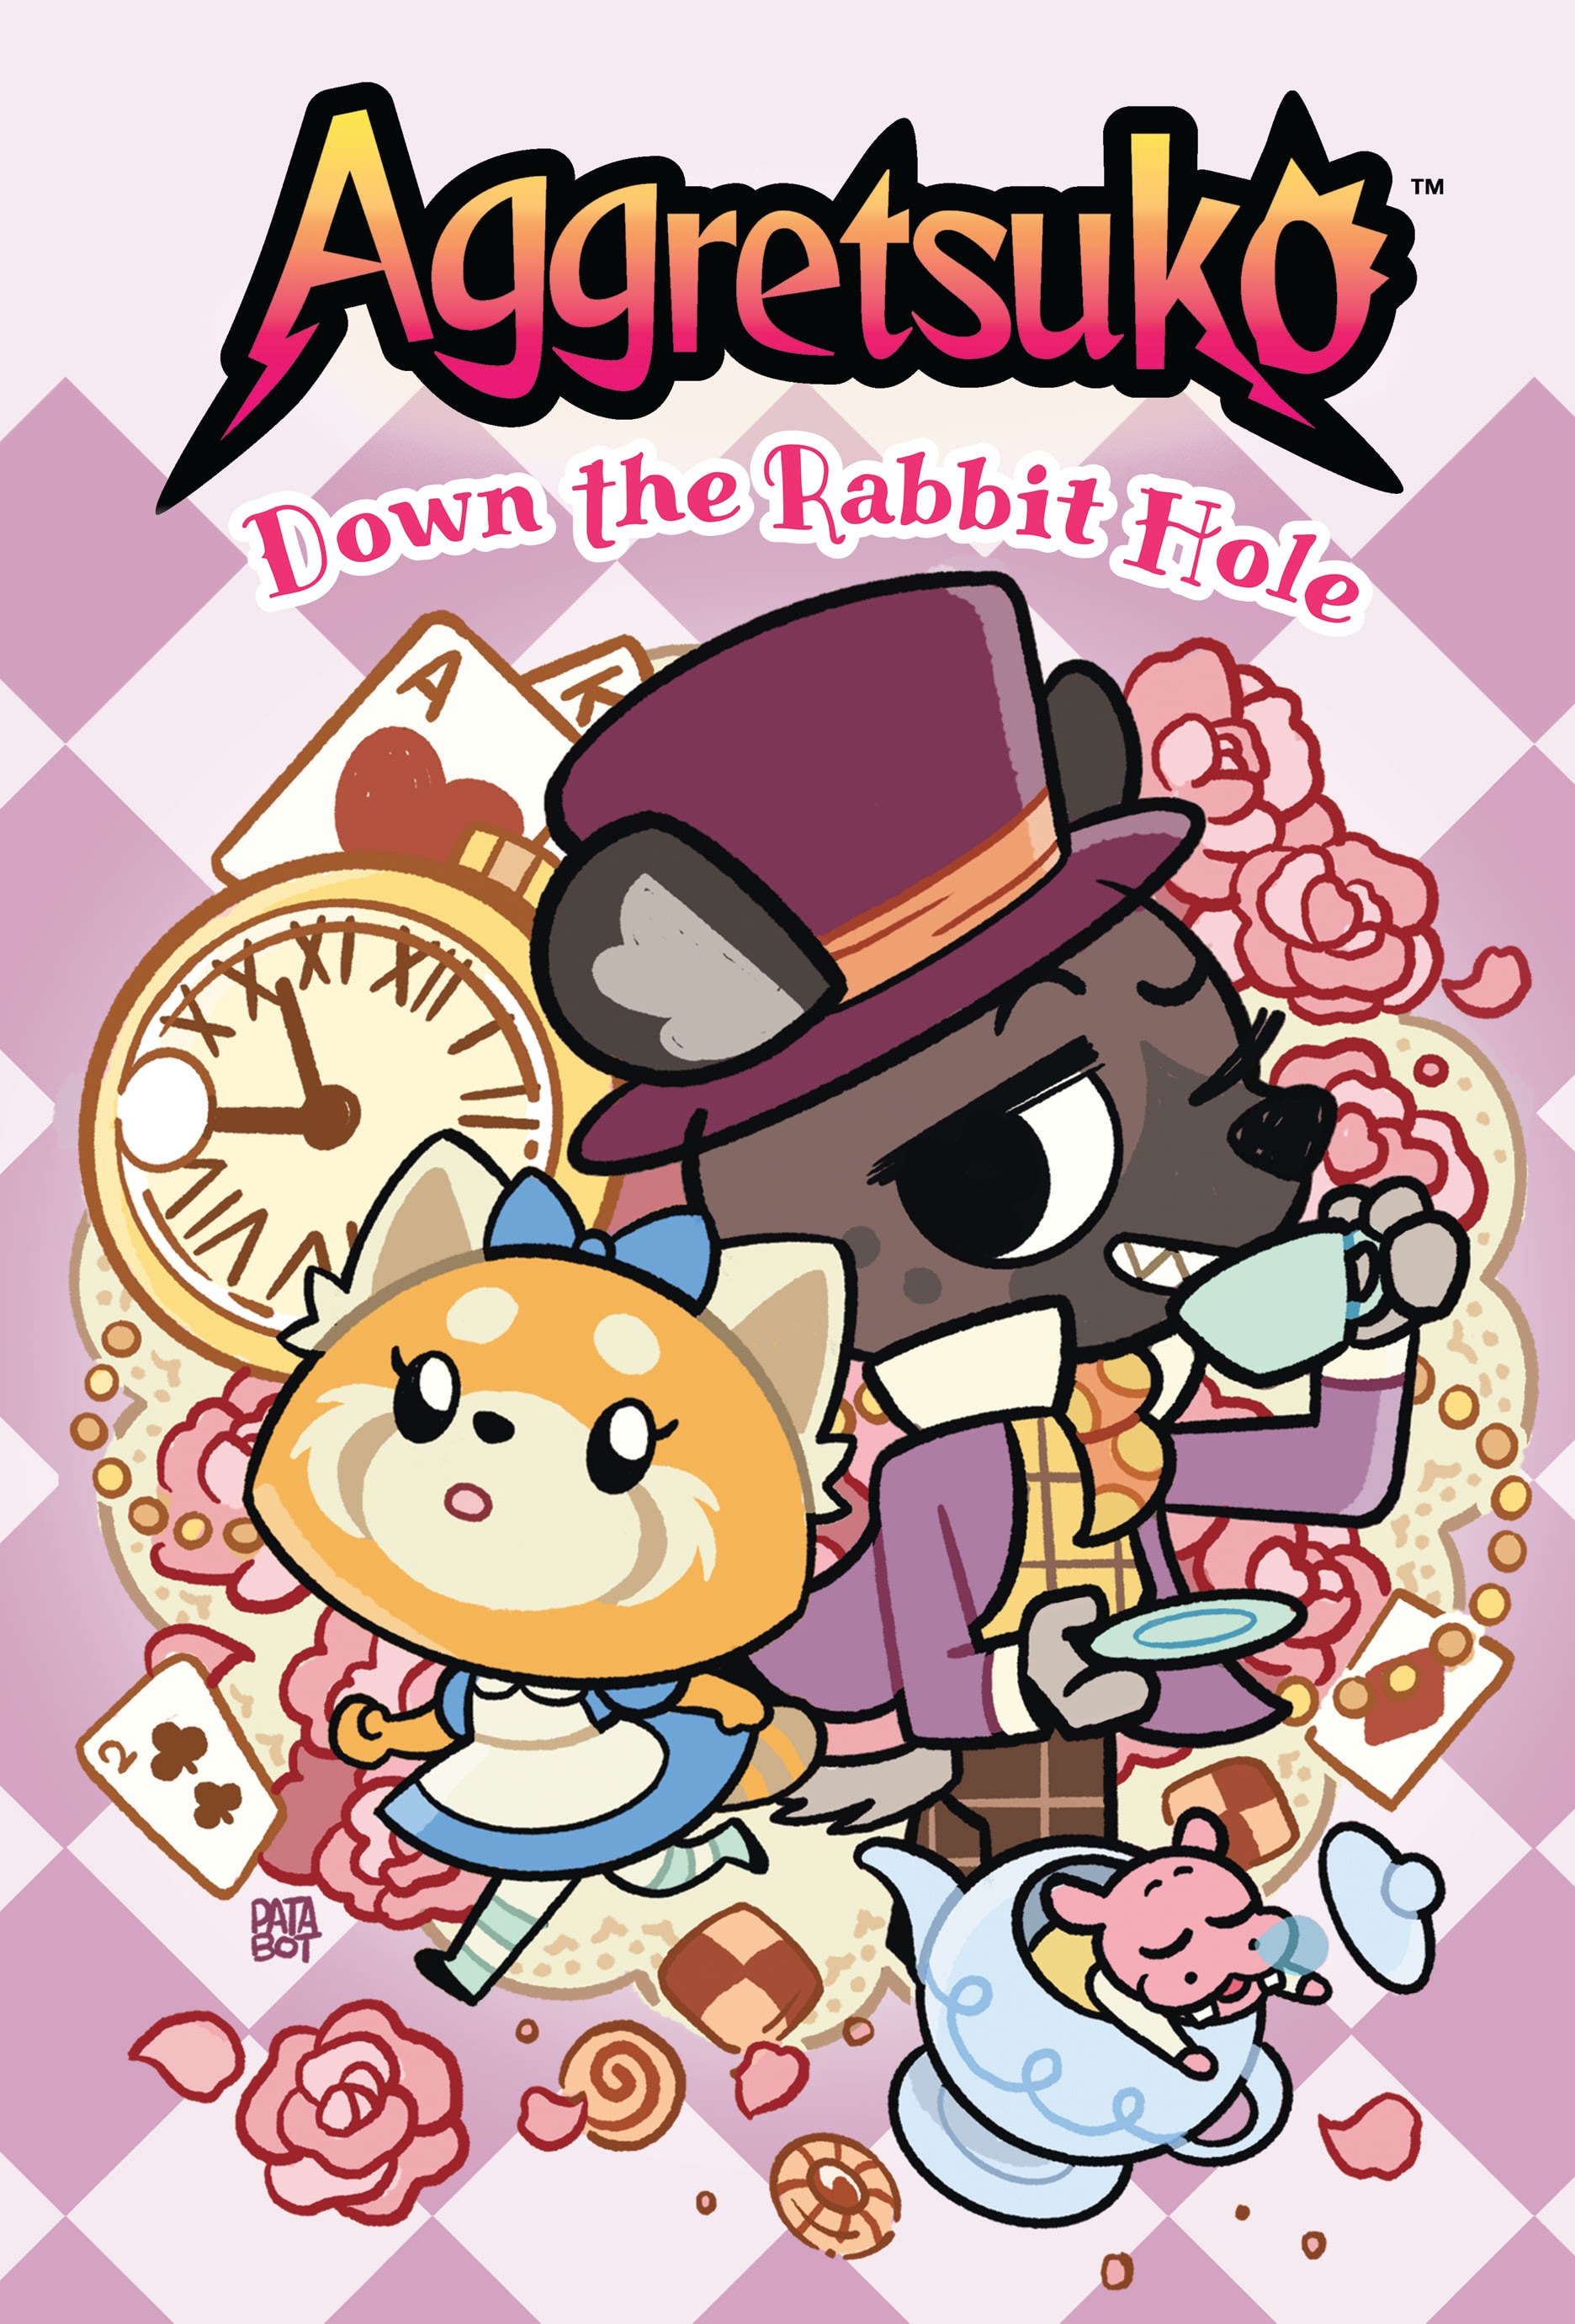 Read online Aggretsuko: Down the Rabbit Hole comic -  Issue # TPB - 1